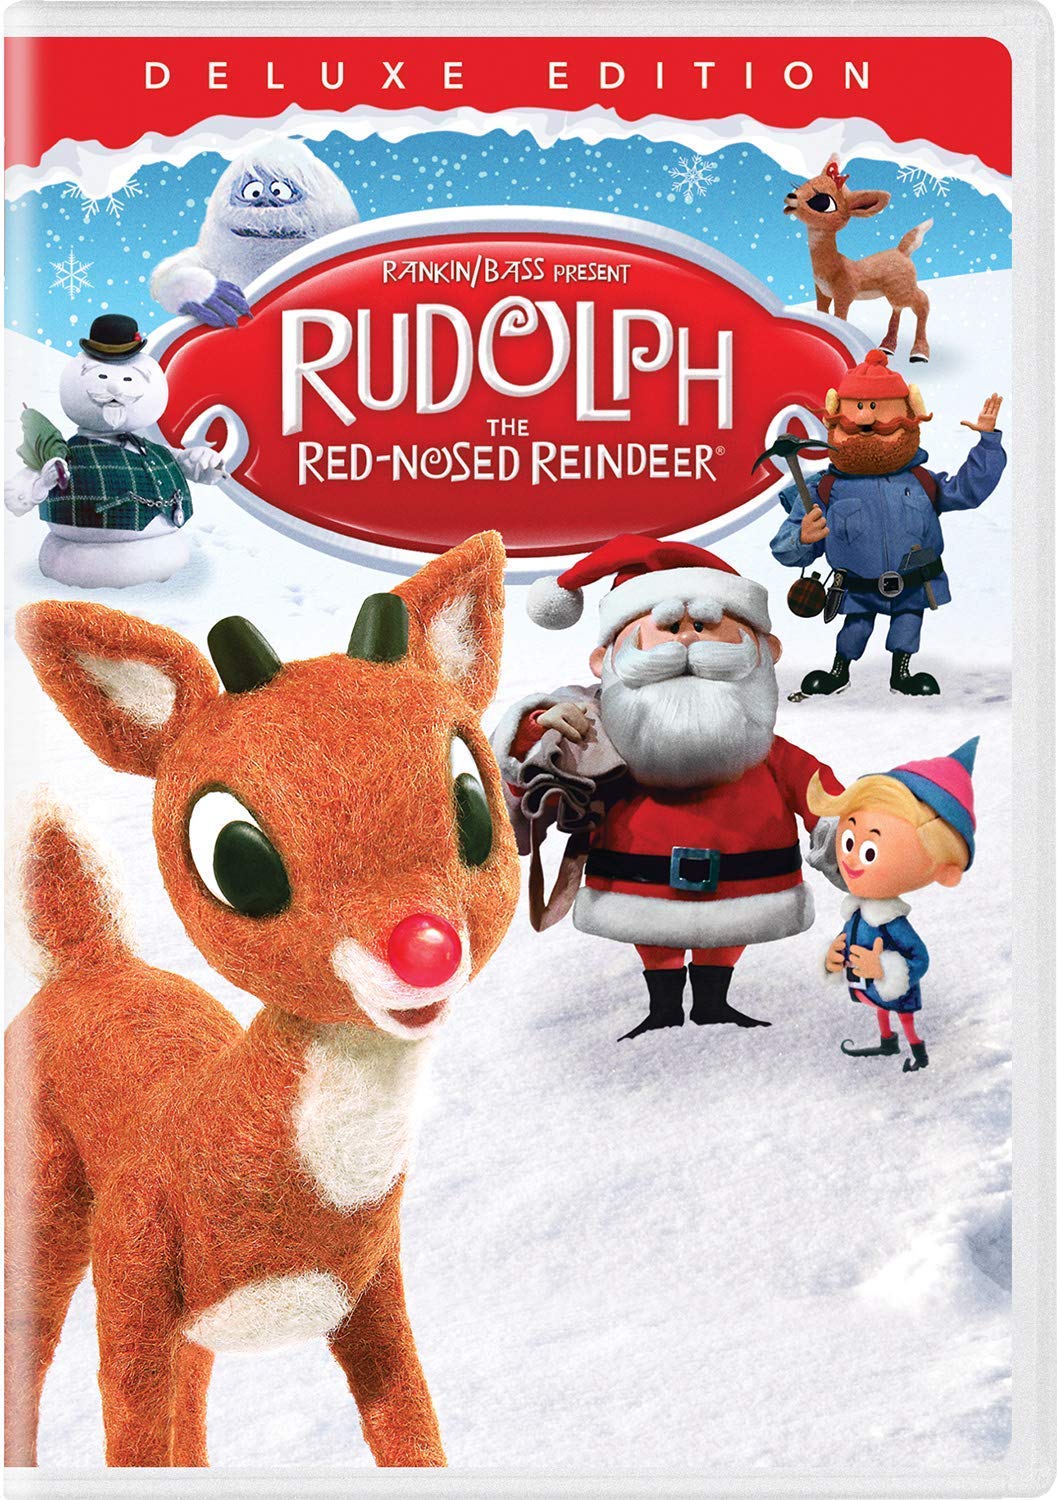 When Will ‘Rudolph the RedNosed Reindeer’ Air? We’ve Got You Covered